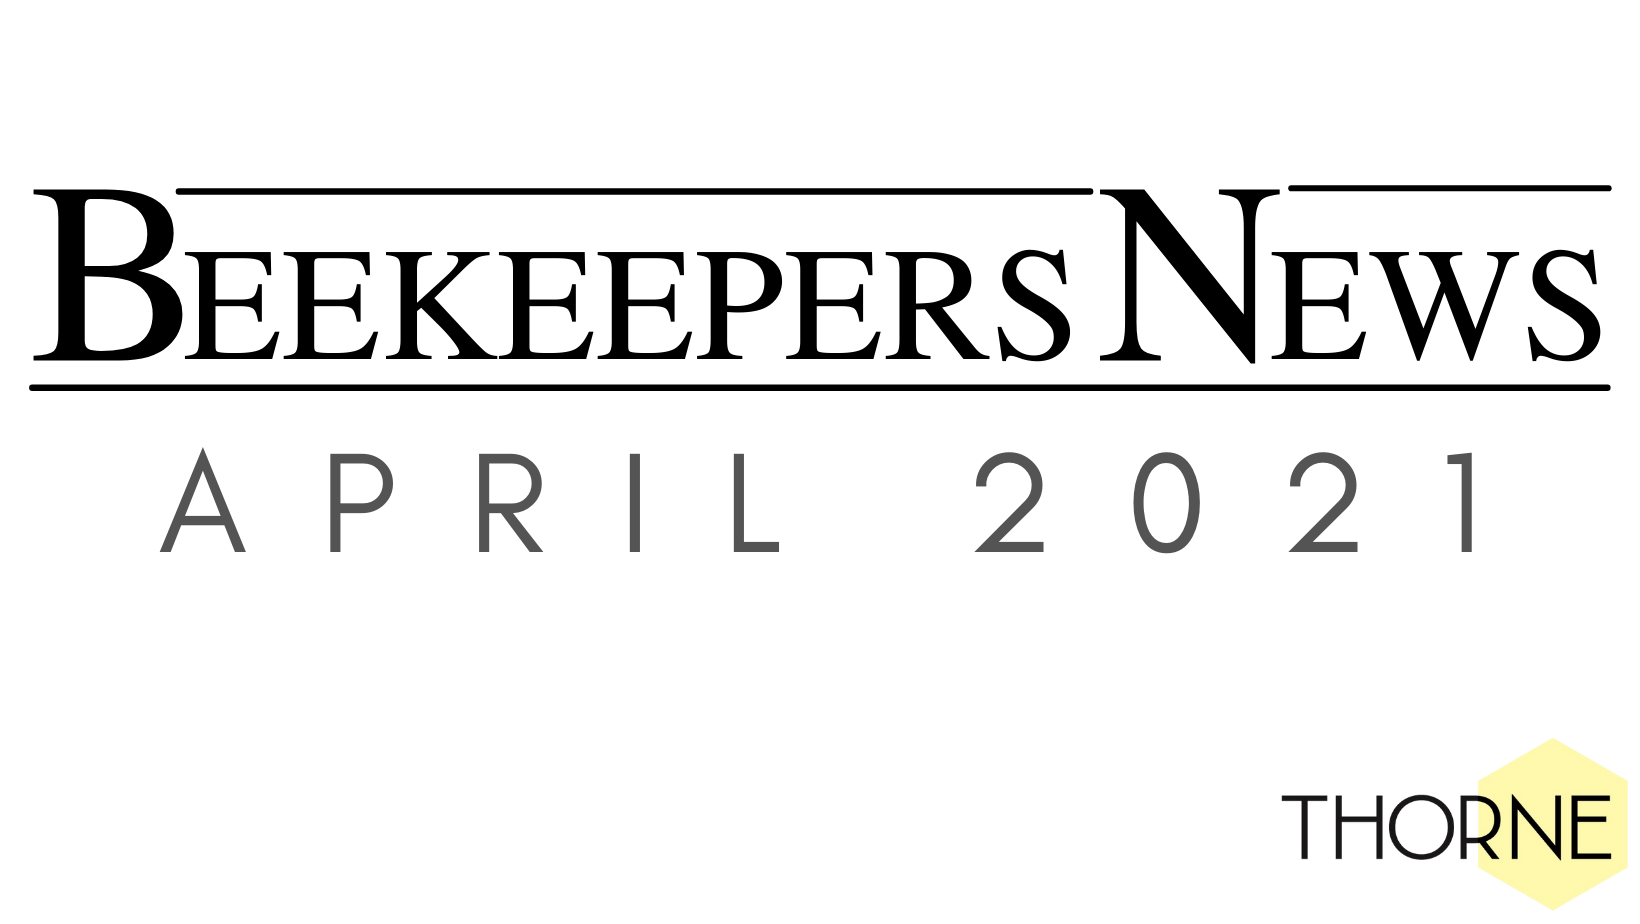 Beekeepers News - April 2021 - Issue 55